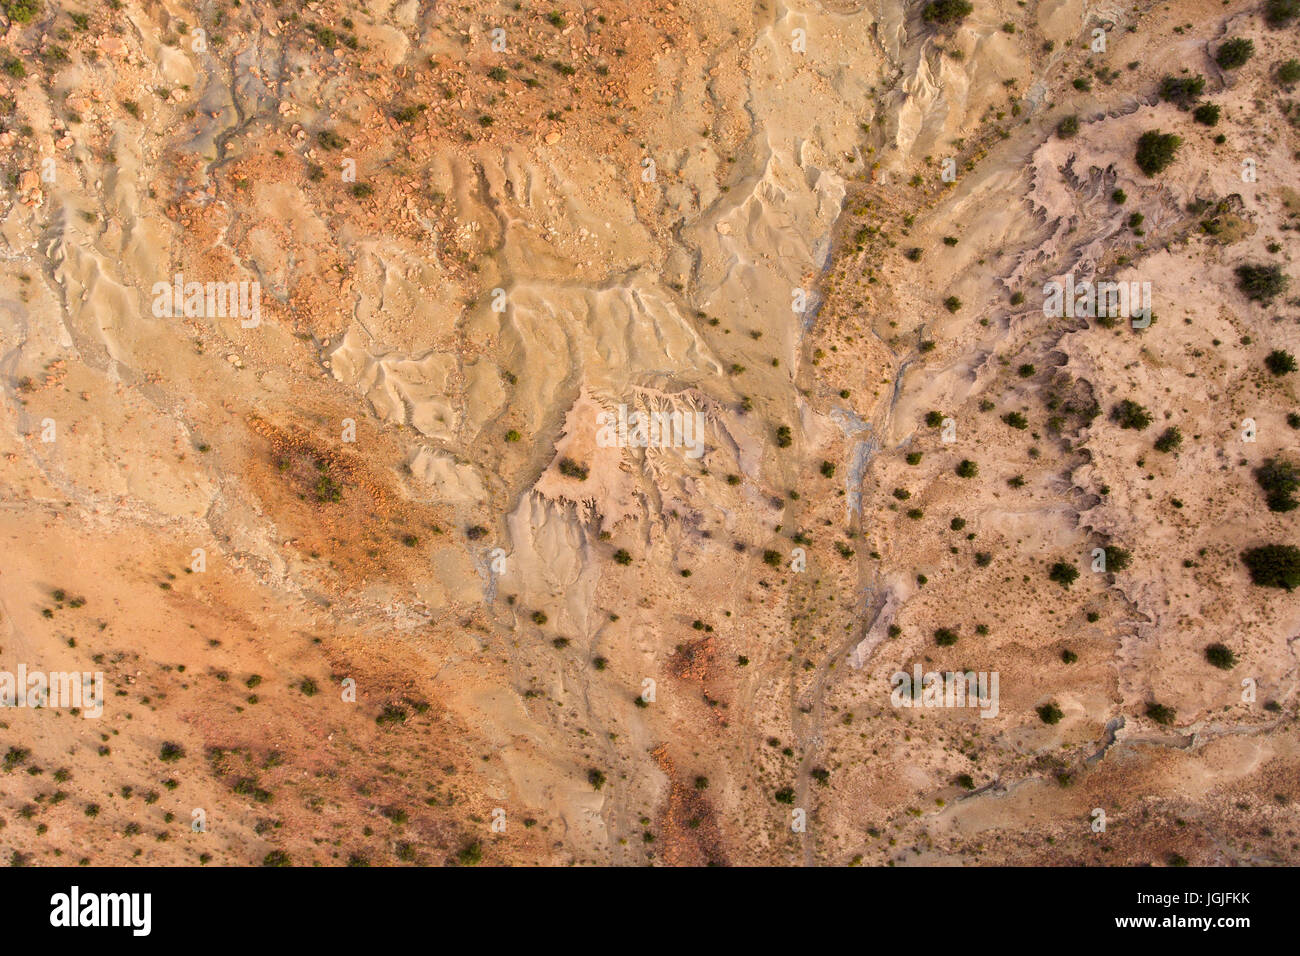 Aerial view of severe soil erosion in an arid region of South Africa Stock Photo